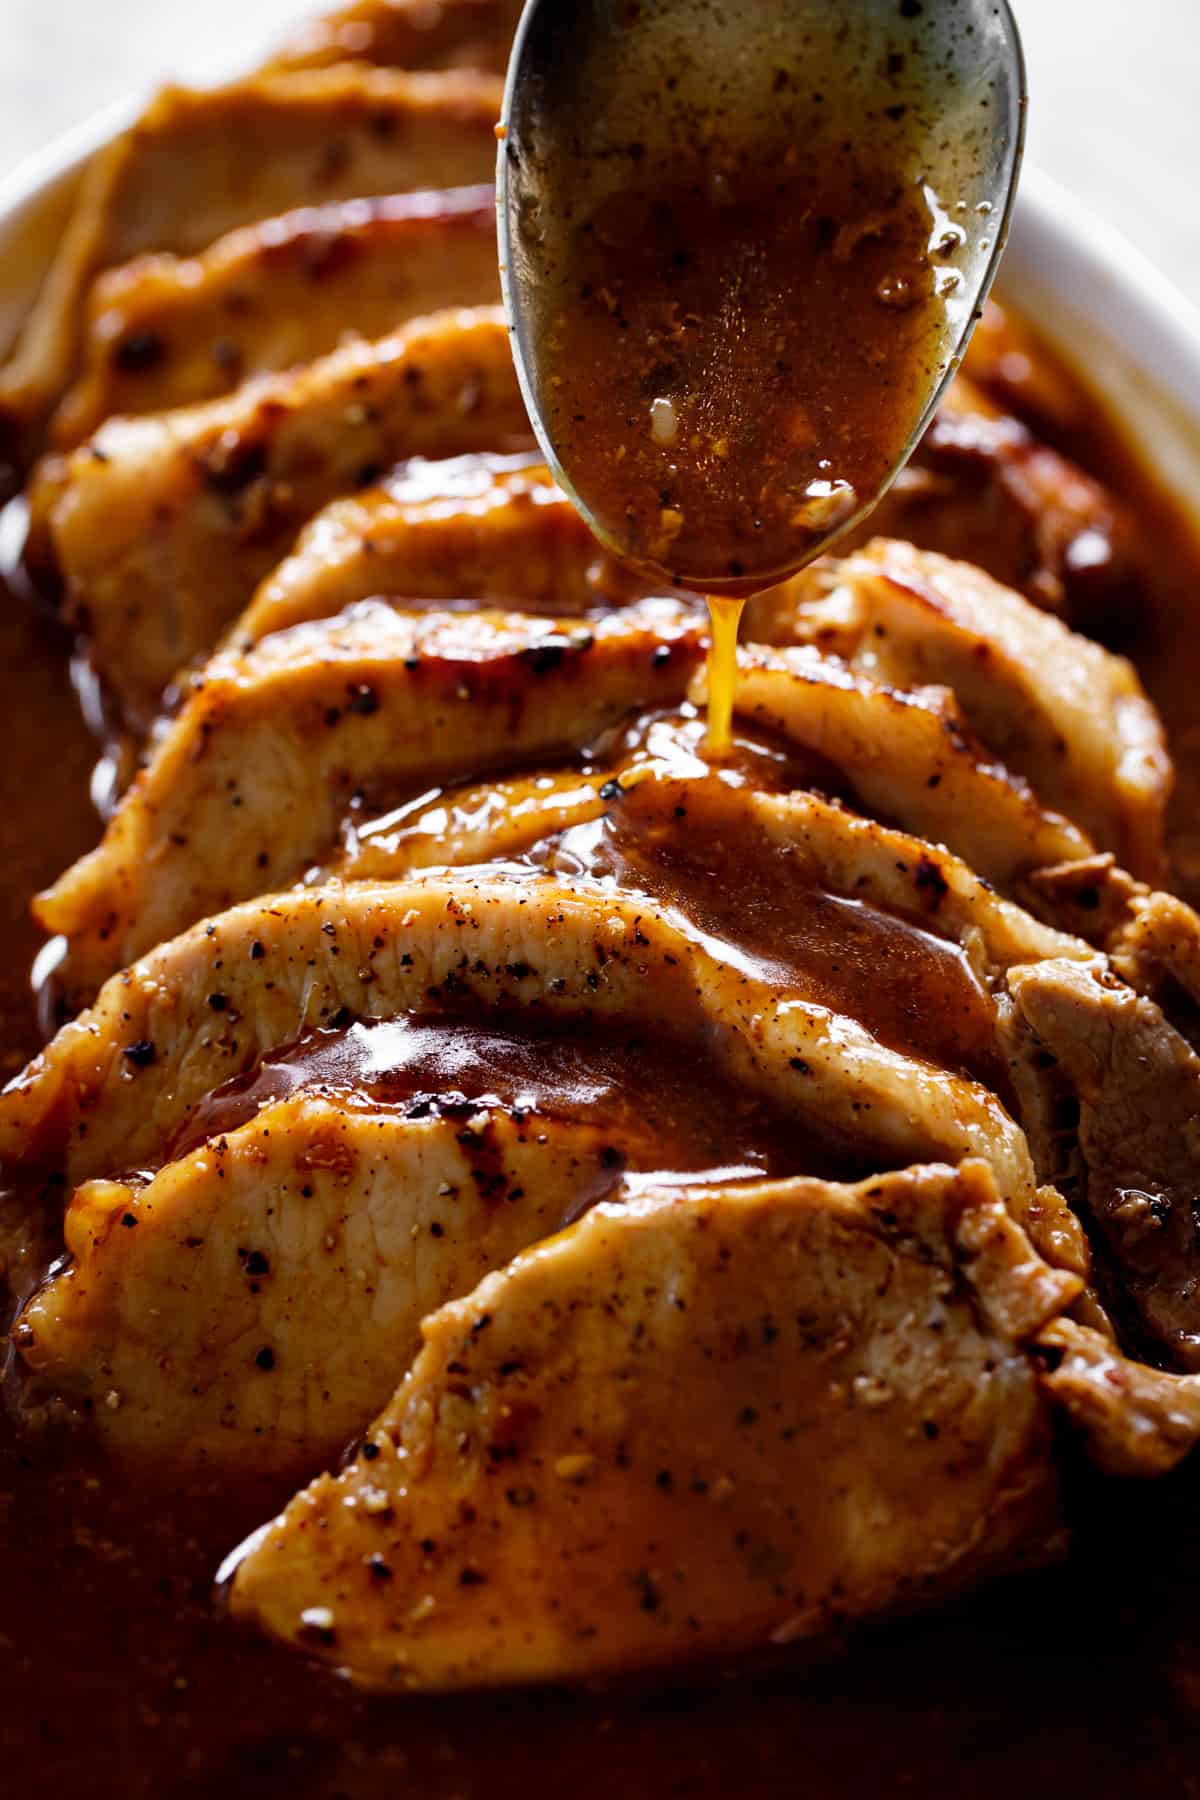 Honey garlic sauce being drizzled over the best pork loin roast with a silver metal spoon | cafedelites.com